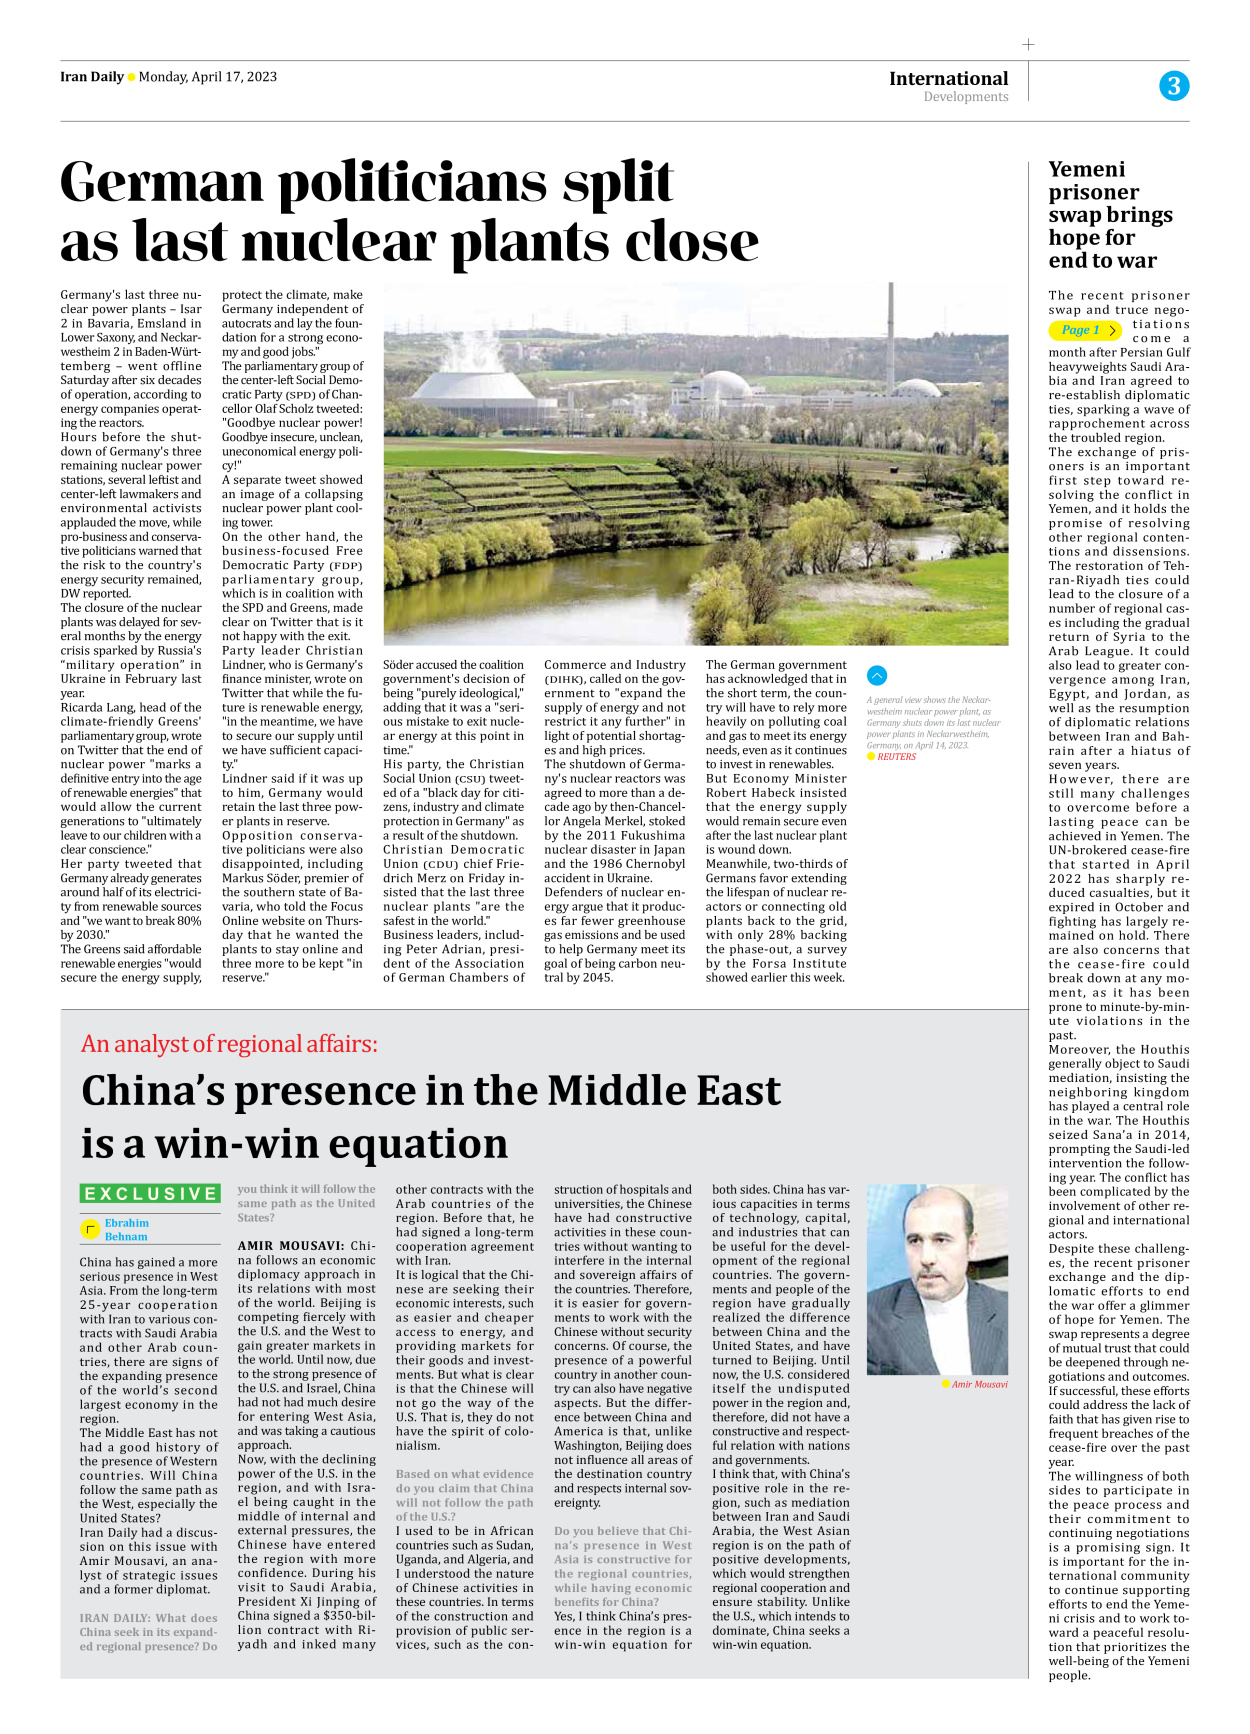 Iran Daily - Number Seven Thousand Two Hundred and Seventy - 17 April 2023 - Page 3